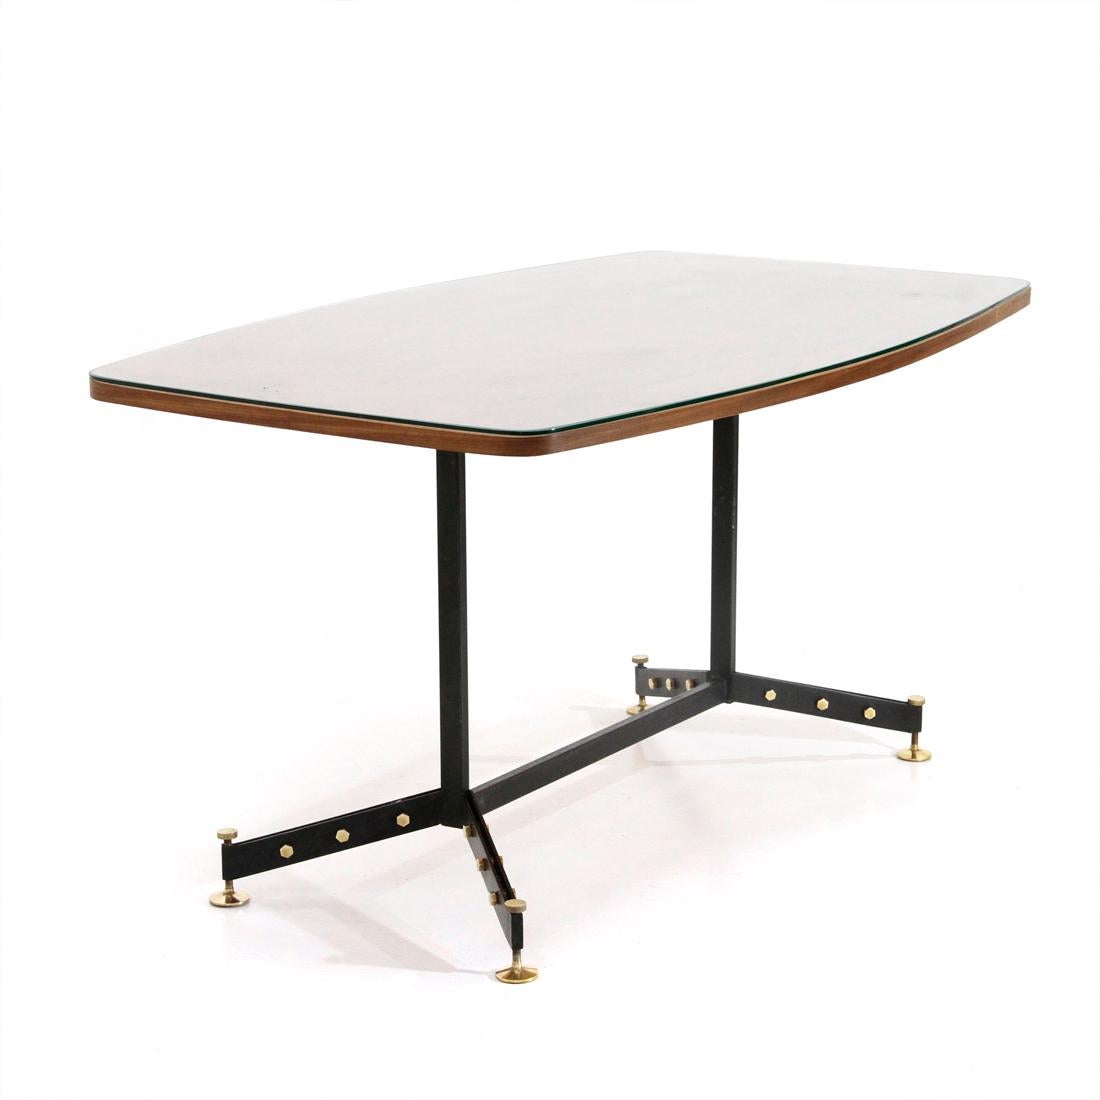 Mid-Century Modern Midcentury Wood, Metal and Brass Rectangular Top Italian Dining Table, 1950s For Sale